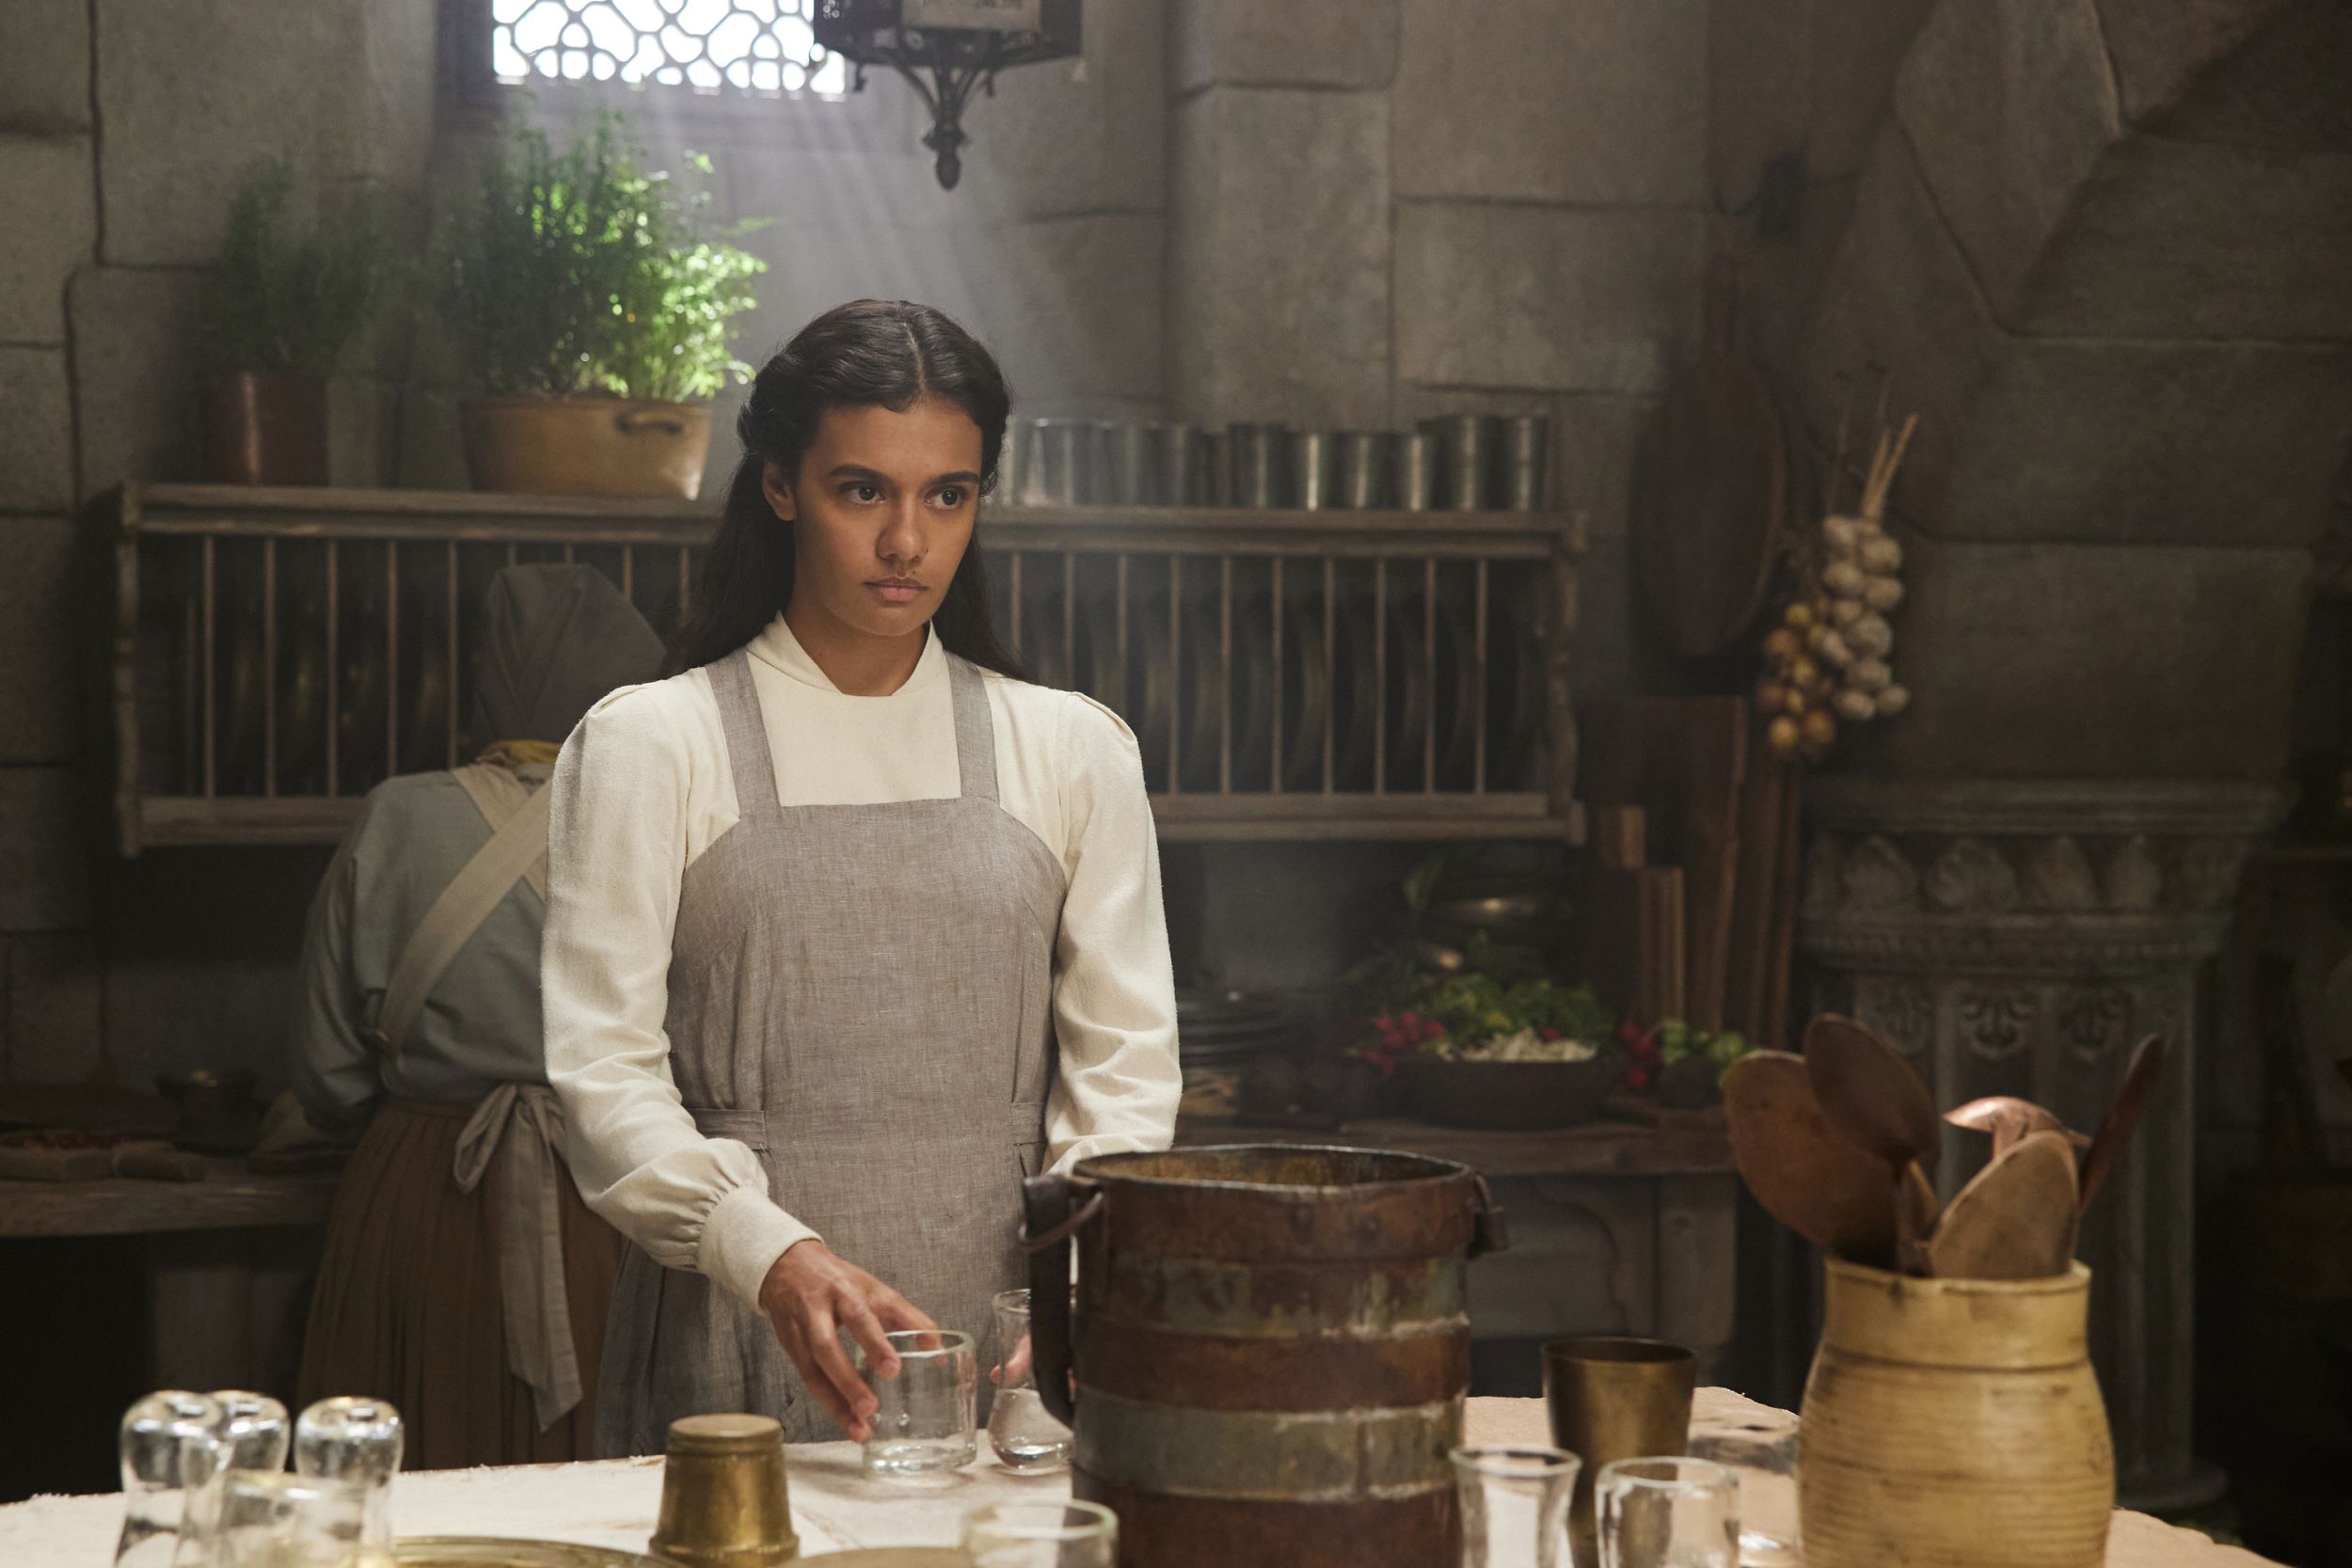 Madeleine Madden as Egwene al'Vere as a novice in the White Tower kitchens in The Wheel of Time Season 2